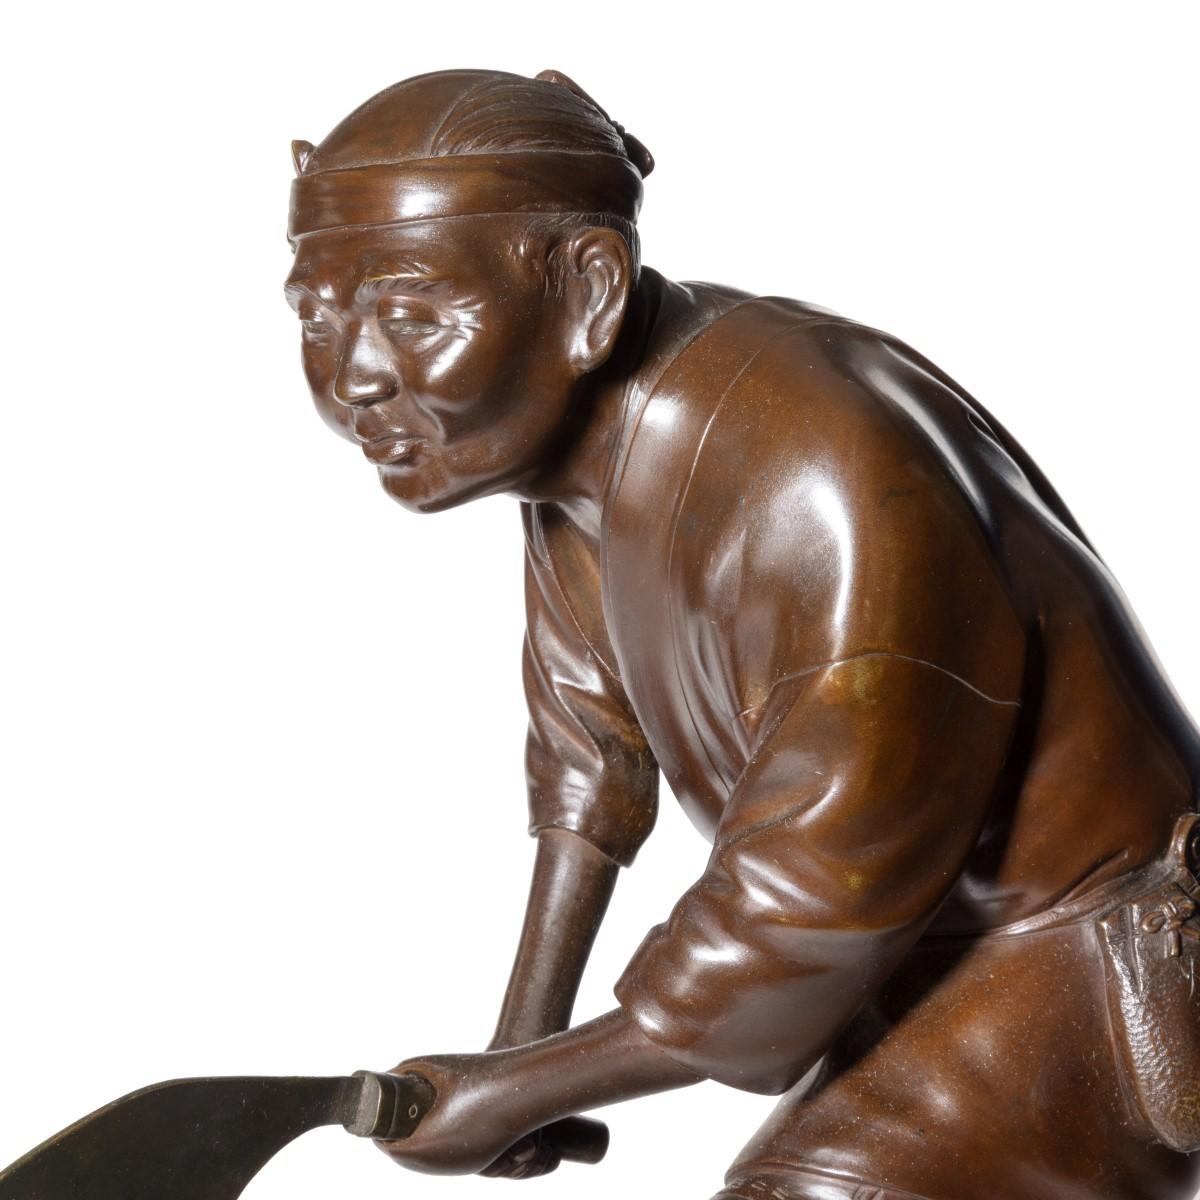 Japanese 19th Century Meiji Period Bronze of a Woodcutter Sawing a Large Tree Trunk